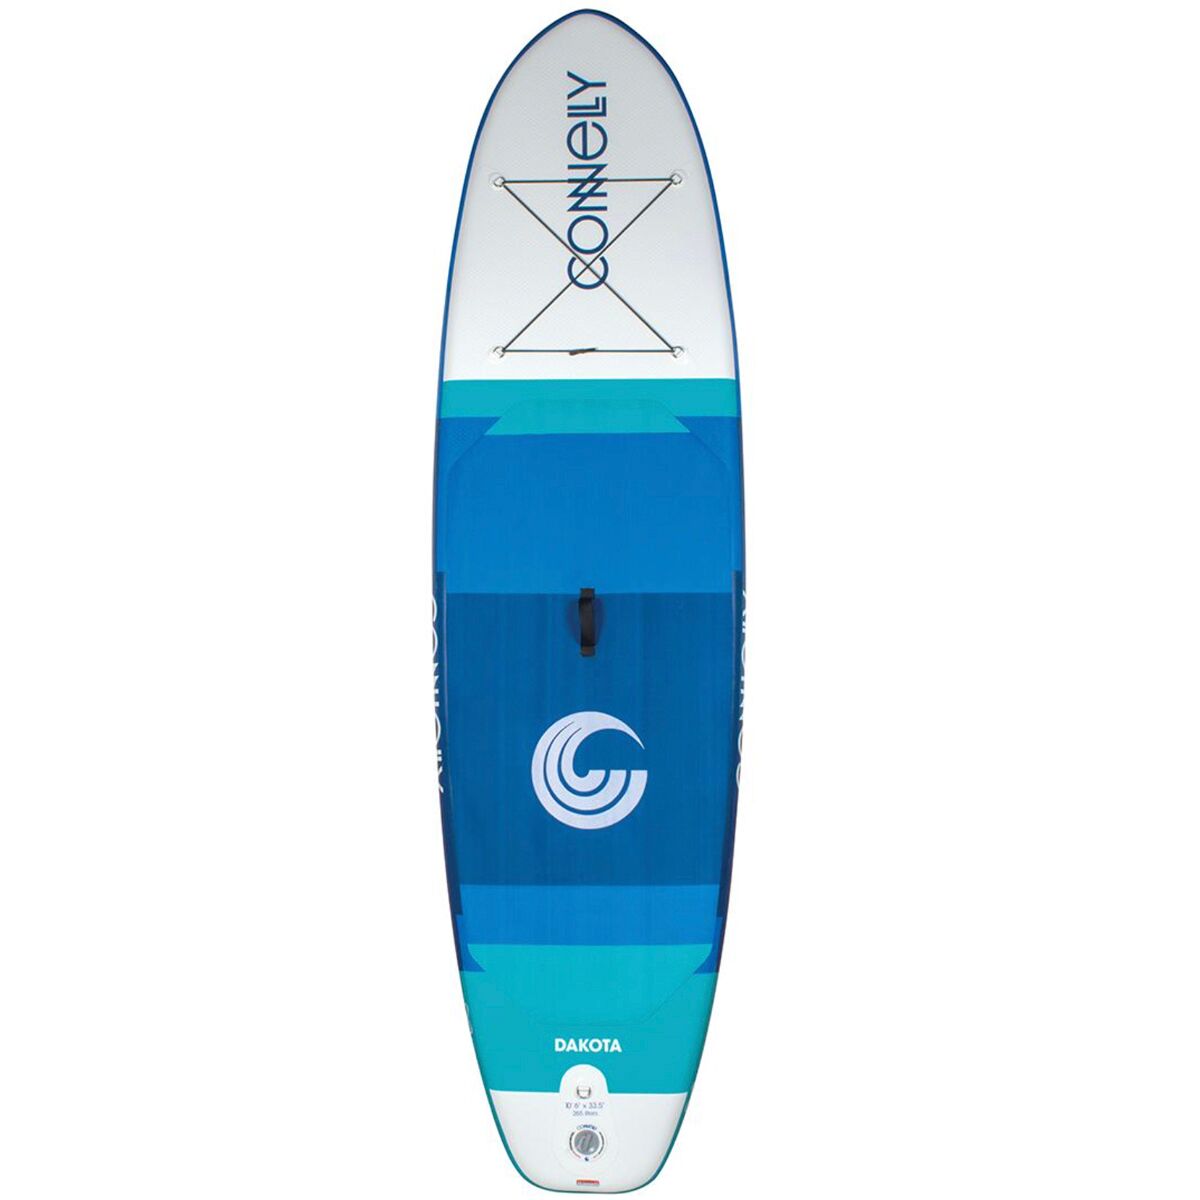 Connelly Skis Dakota Inflatable Stand-Up Paddleboard